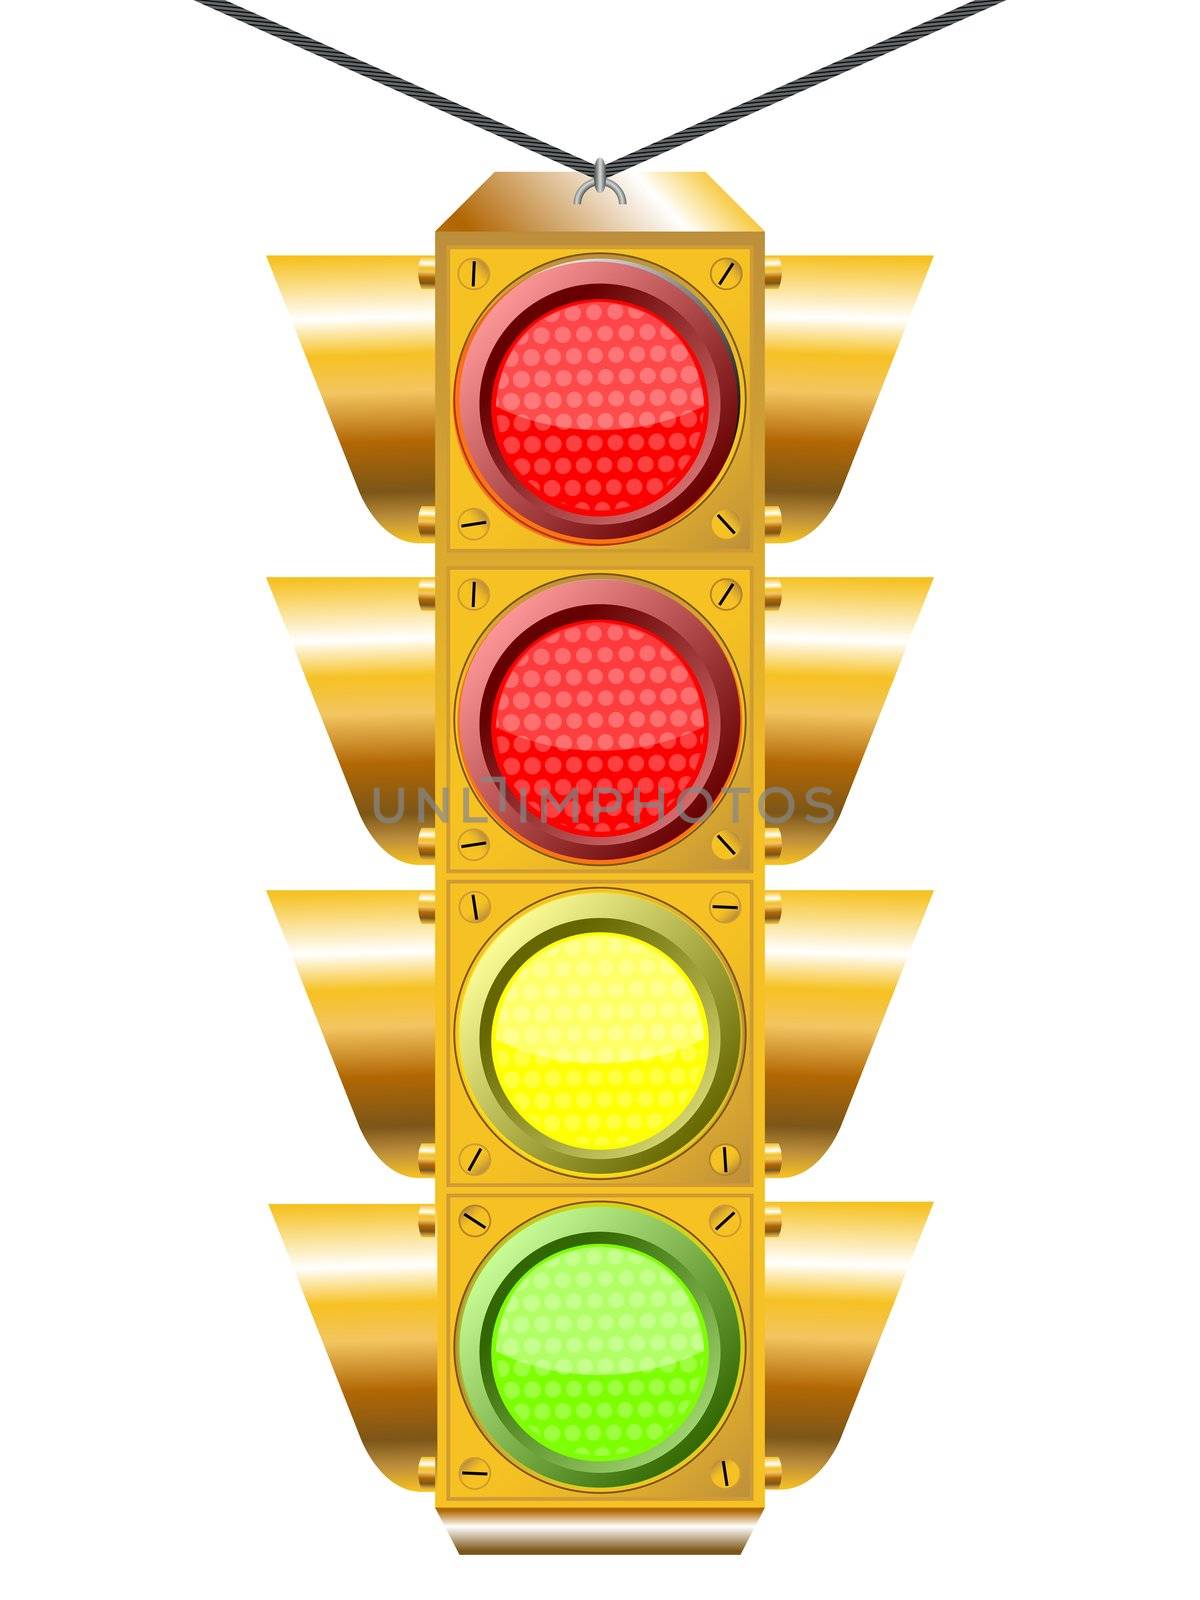 traffic light with four lights against white background, abstract vector art illustration